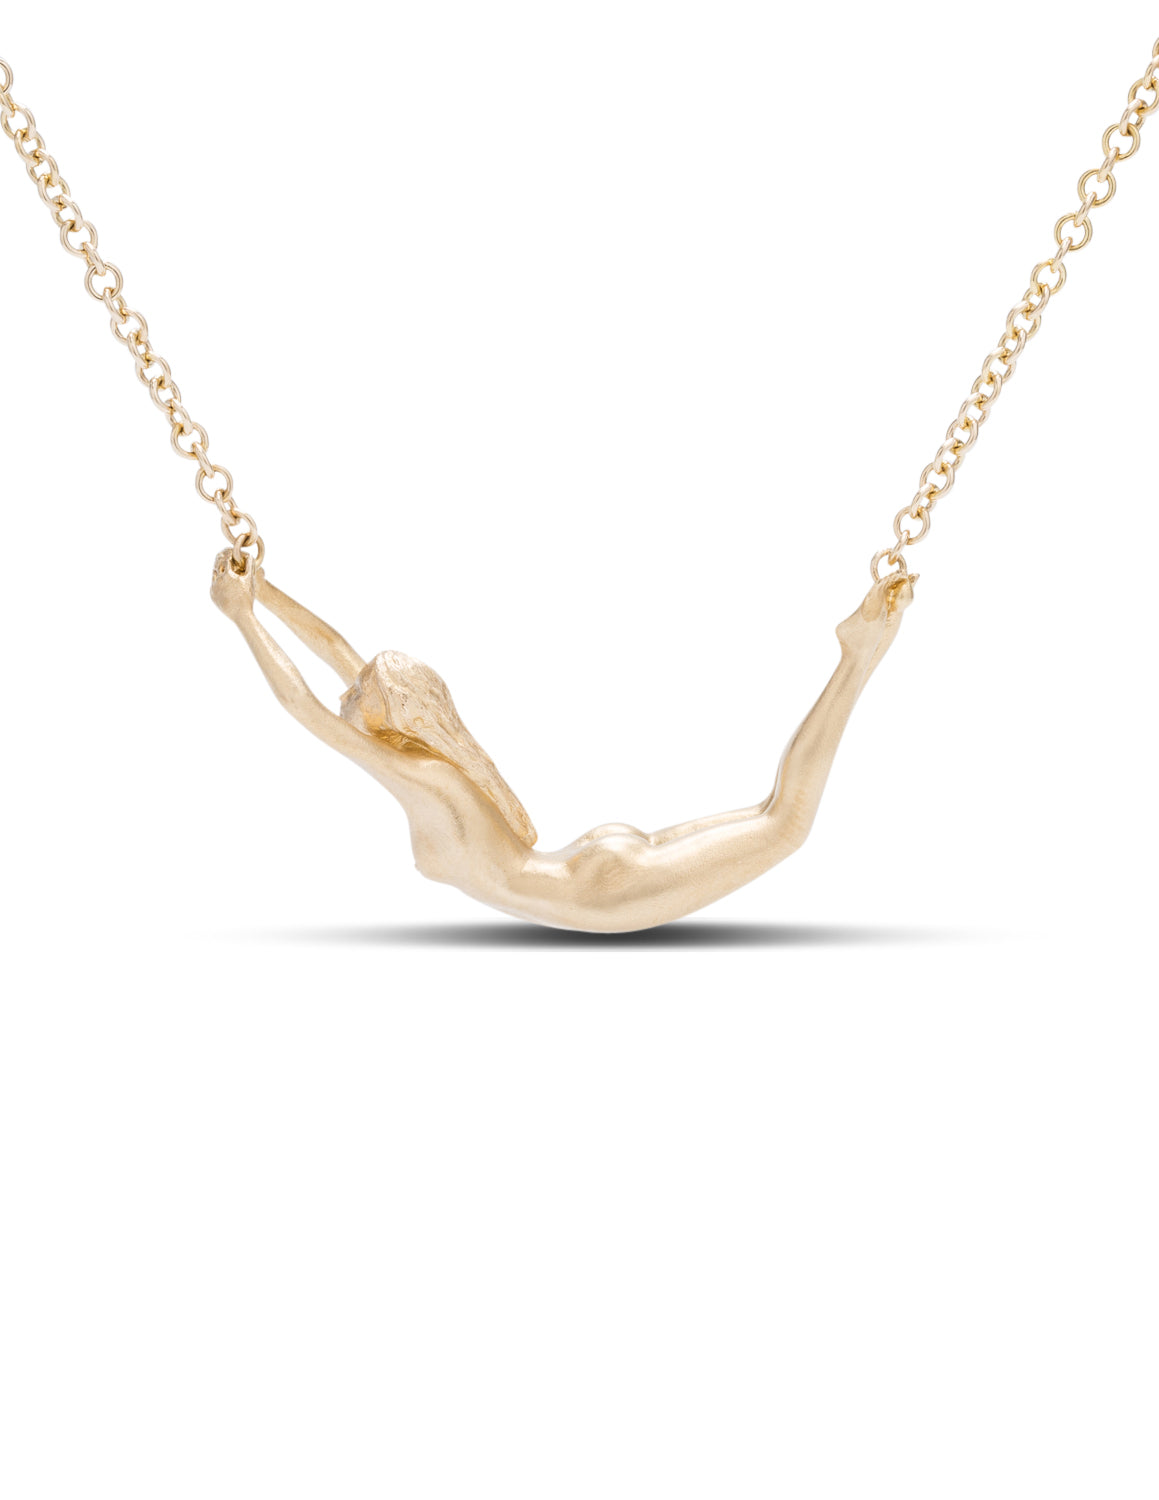 Trapeze Necklace - Charles Koll Jewellers